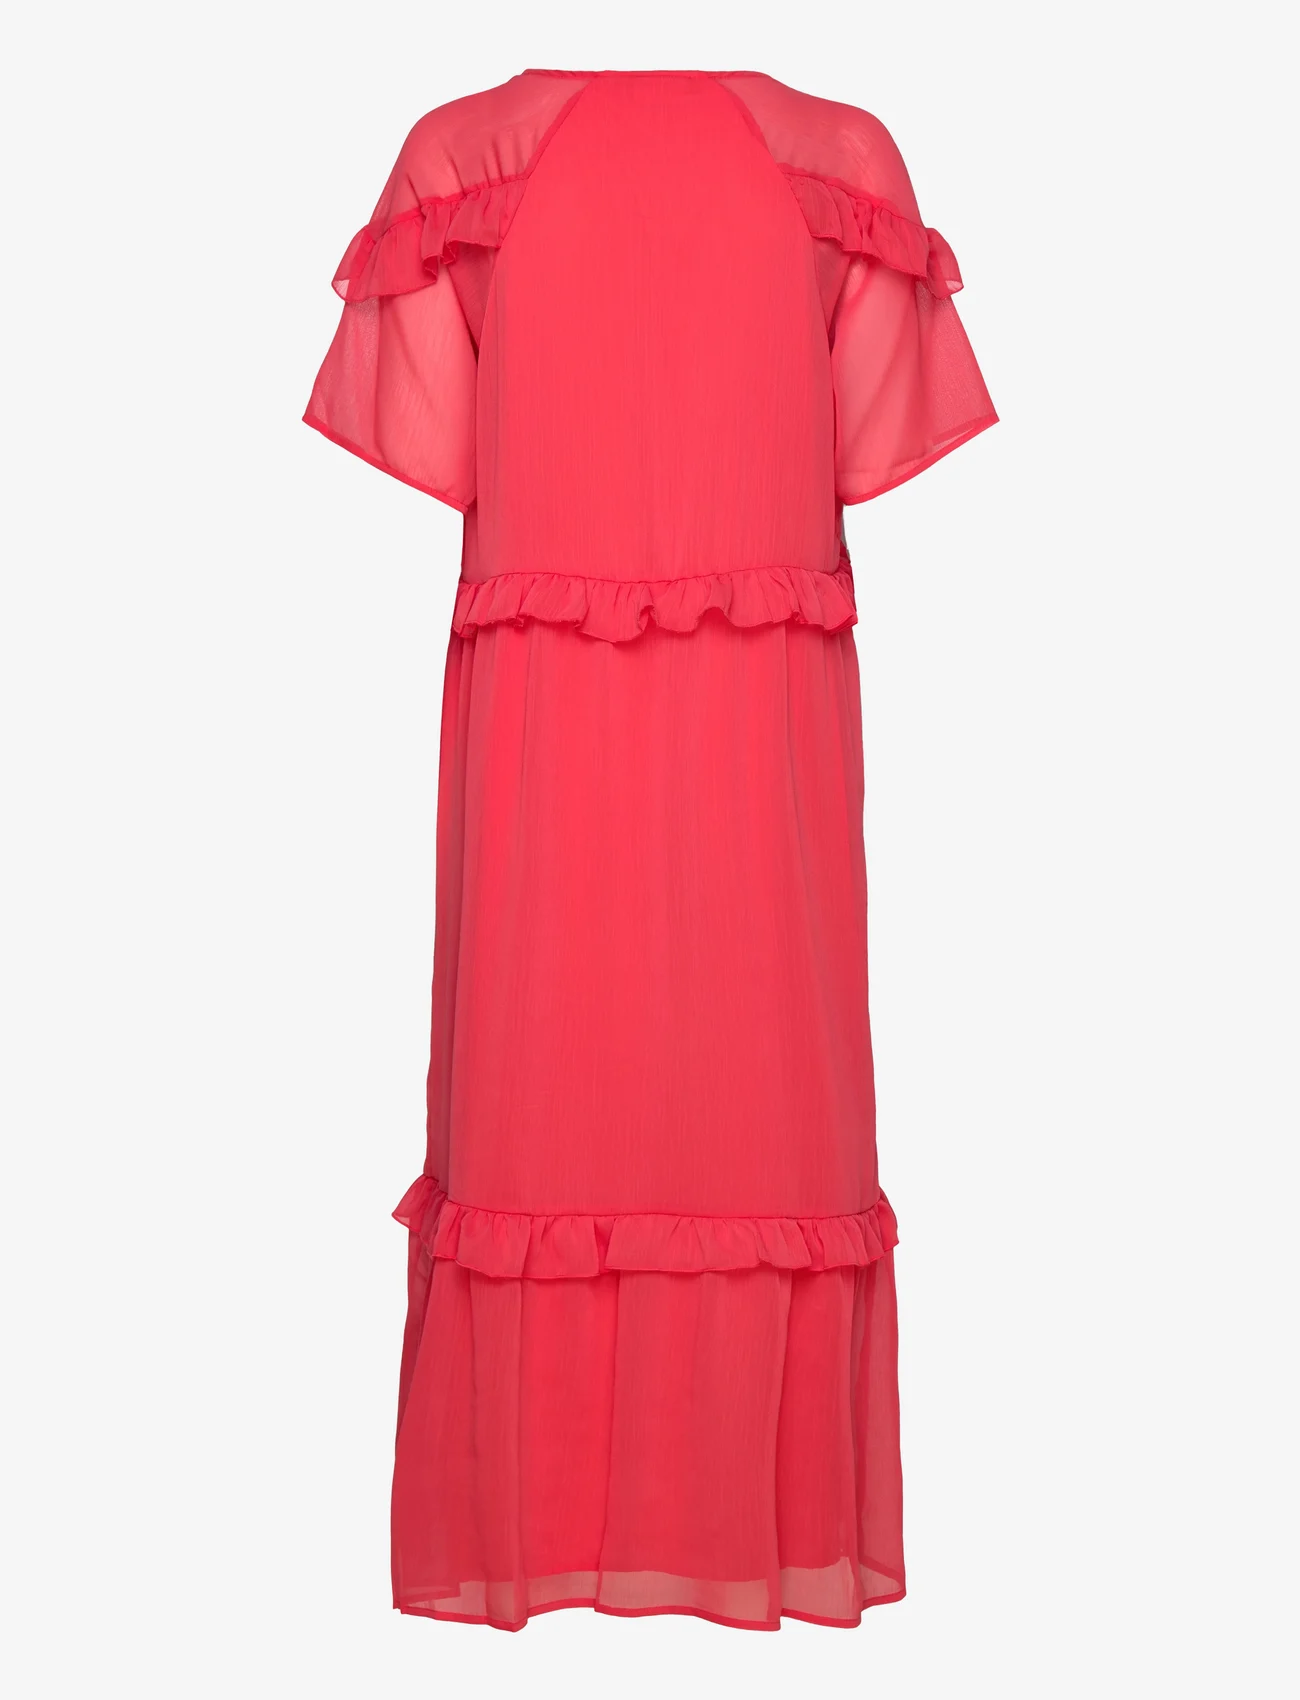 Coster Copenhagen - Long dress with frills - party wear at outlet prices - coral pink - 1